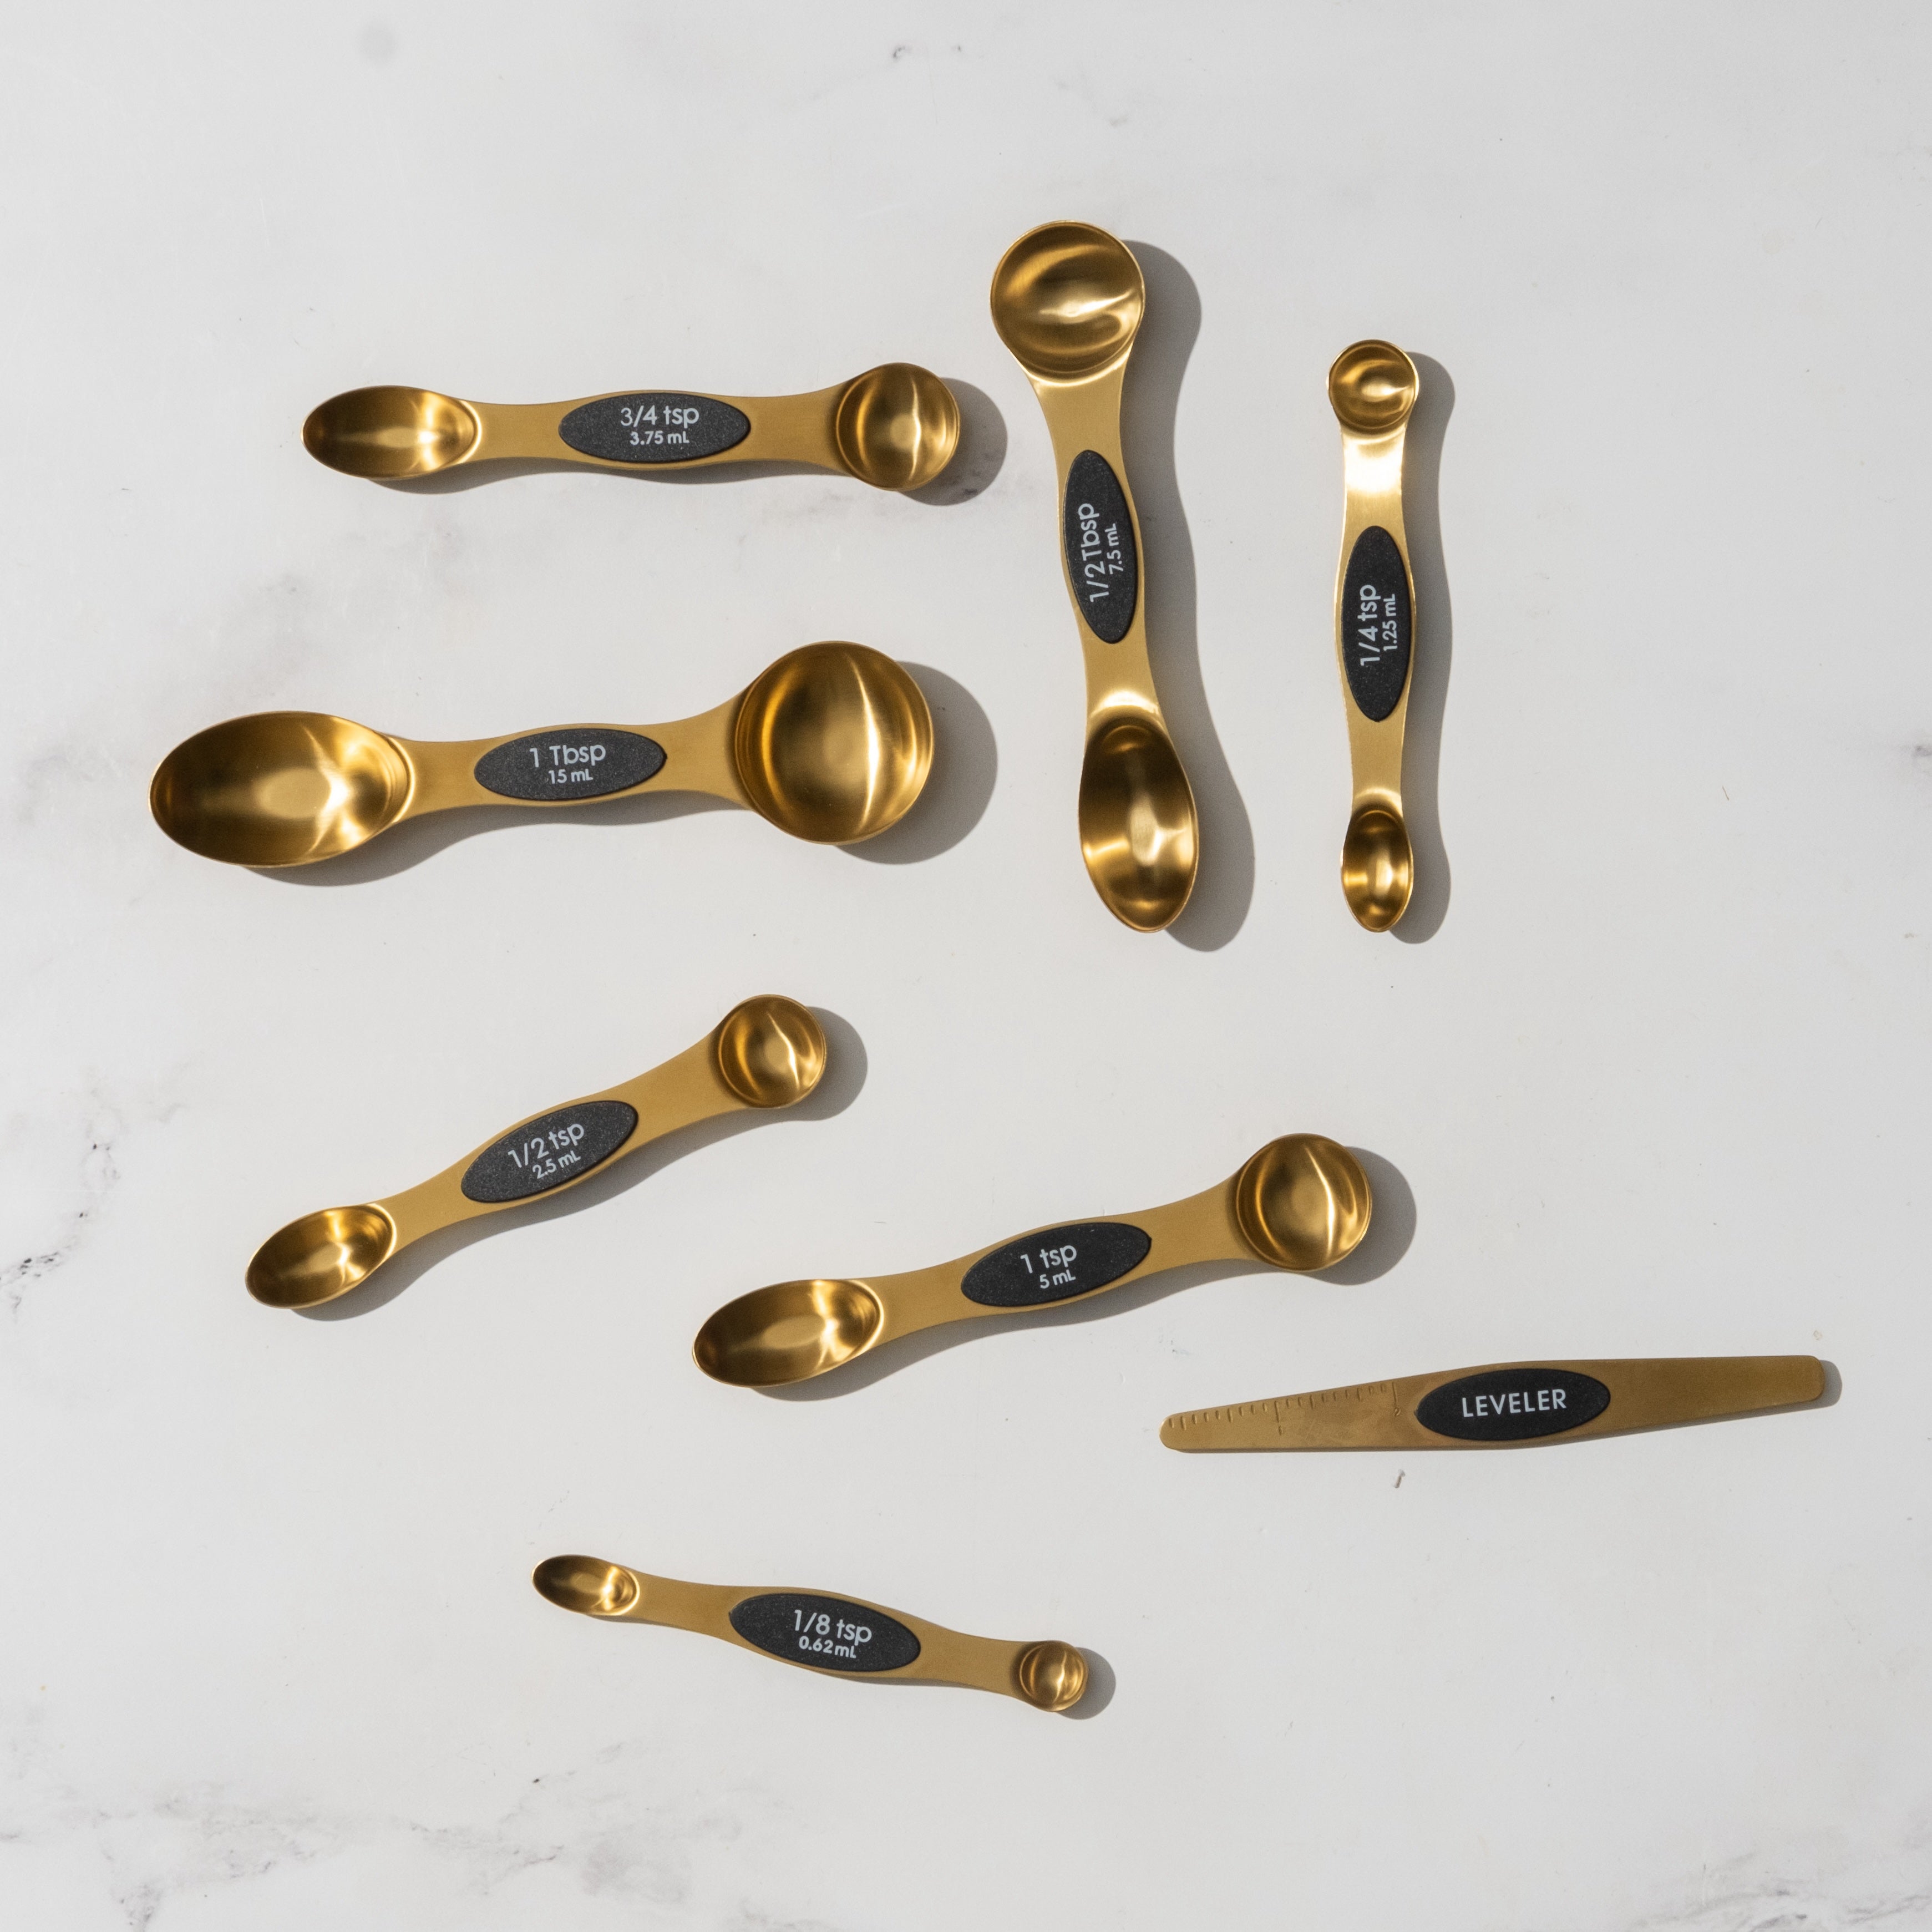  Magnetic Measuring Spoons Set - Stainless Steel Measuring Spoons  - Magnetic Measuring Spoon Set, Gold Measuring Spoons Magnetic, Cute Measuring  Spoons for Cooking & Baking - Metal Measuring Spoons: Home & Kitchen